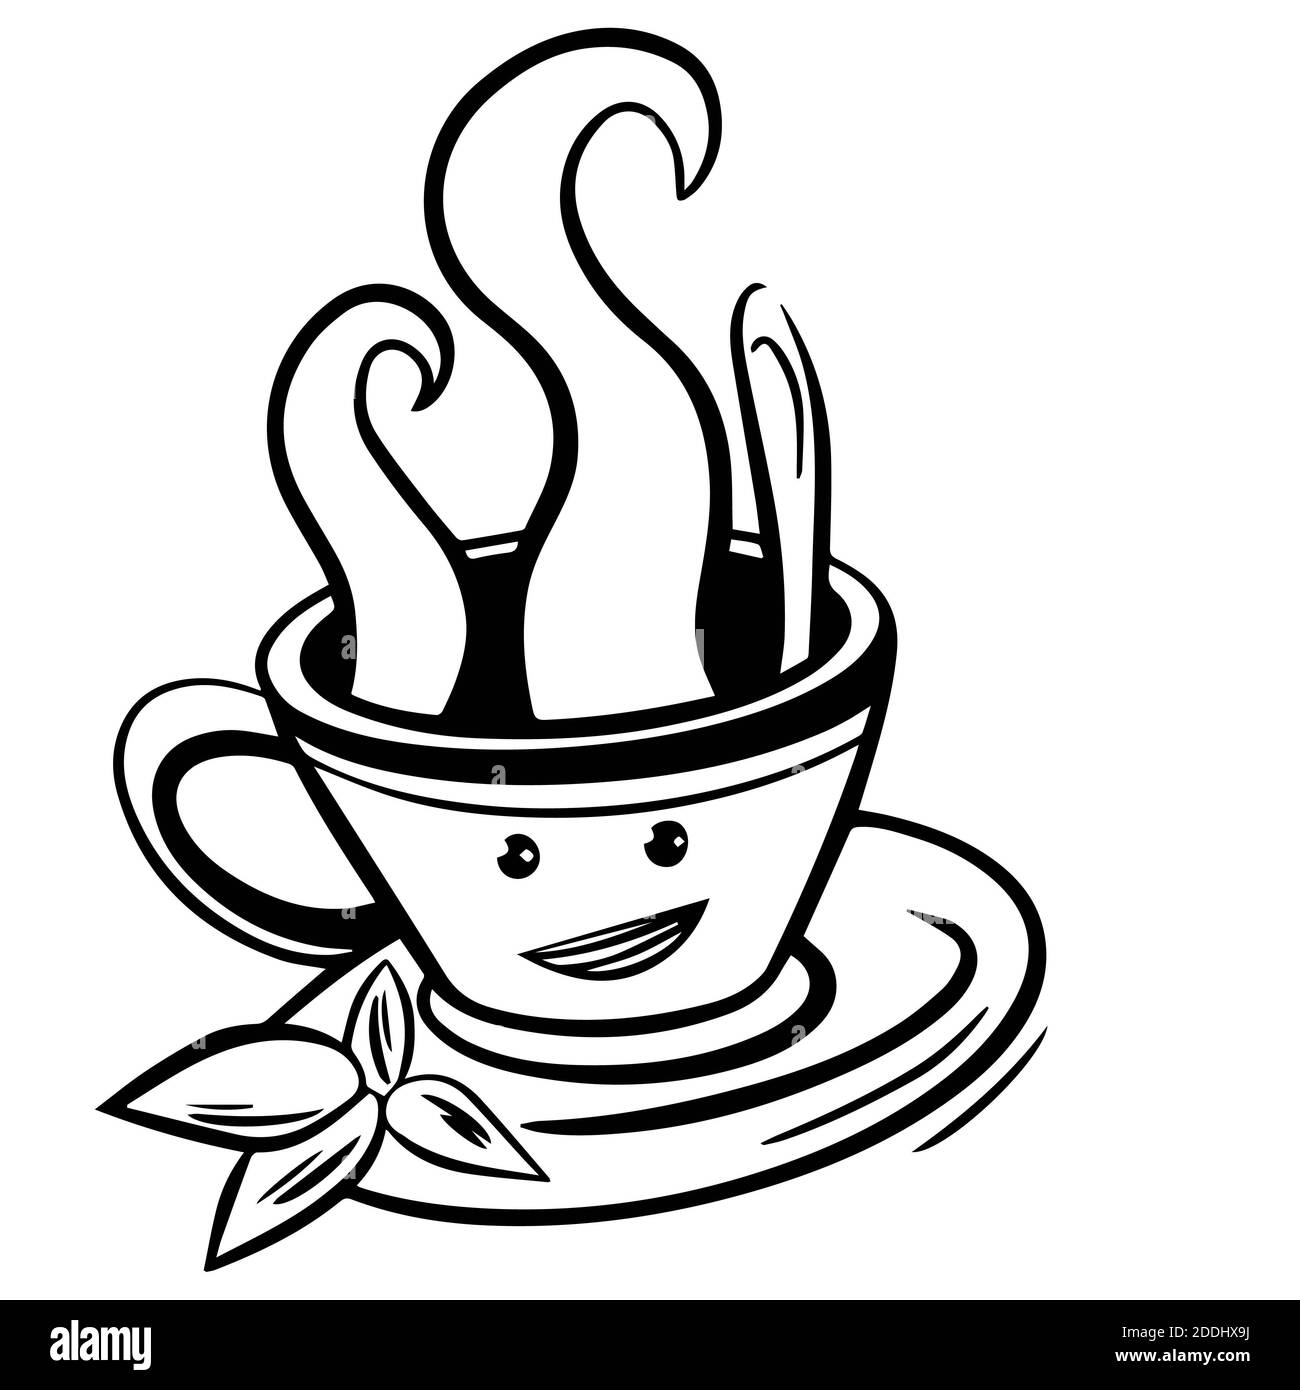 Vector Cute Cartoon Cup Of Tea Or Coffee. Line Sketch Illustration. Logo,  Print For Design Cafe Menu And More. Isolated On White Background Stock  Photo - Alamy